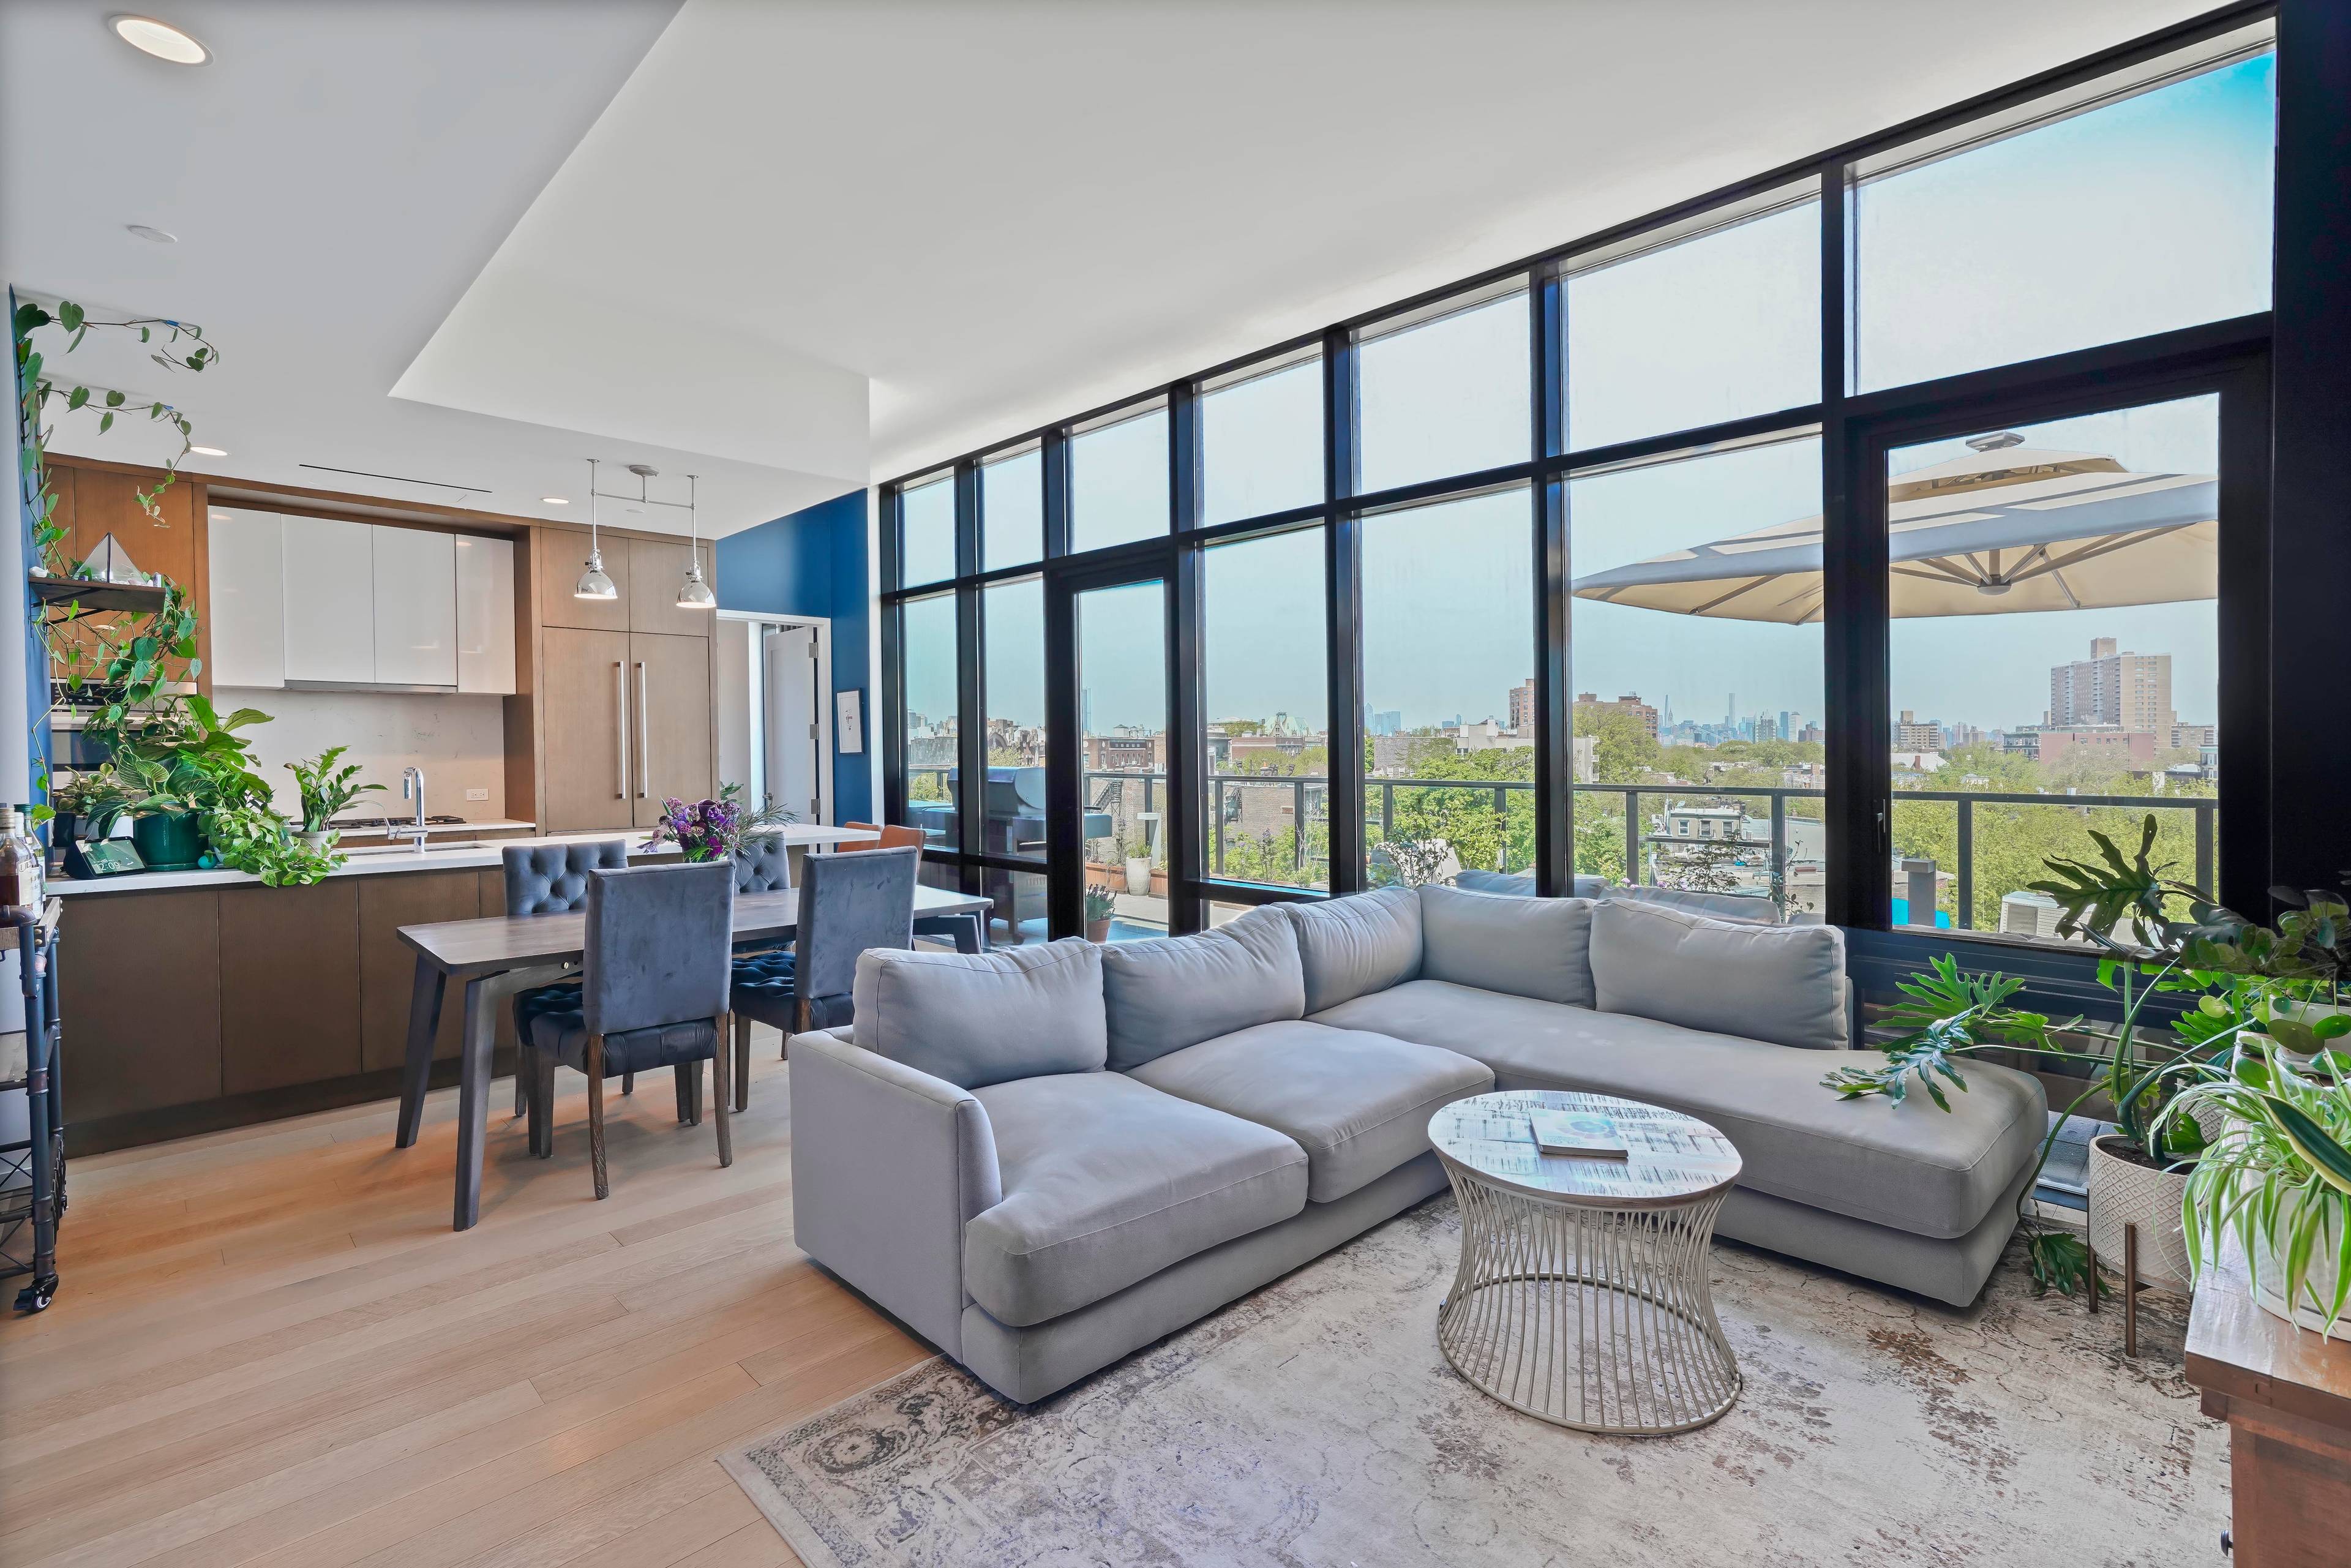 Penthouse PH3 at The Waverly Brooklyn is a stunning three bedroom residence with soaring ceilings, floor to ceiling windows, a private terrace, and sweeping skyline views.